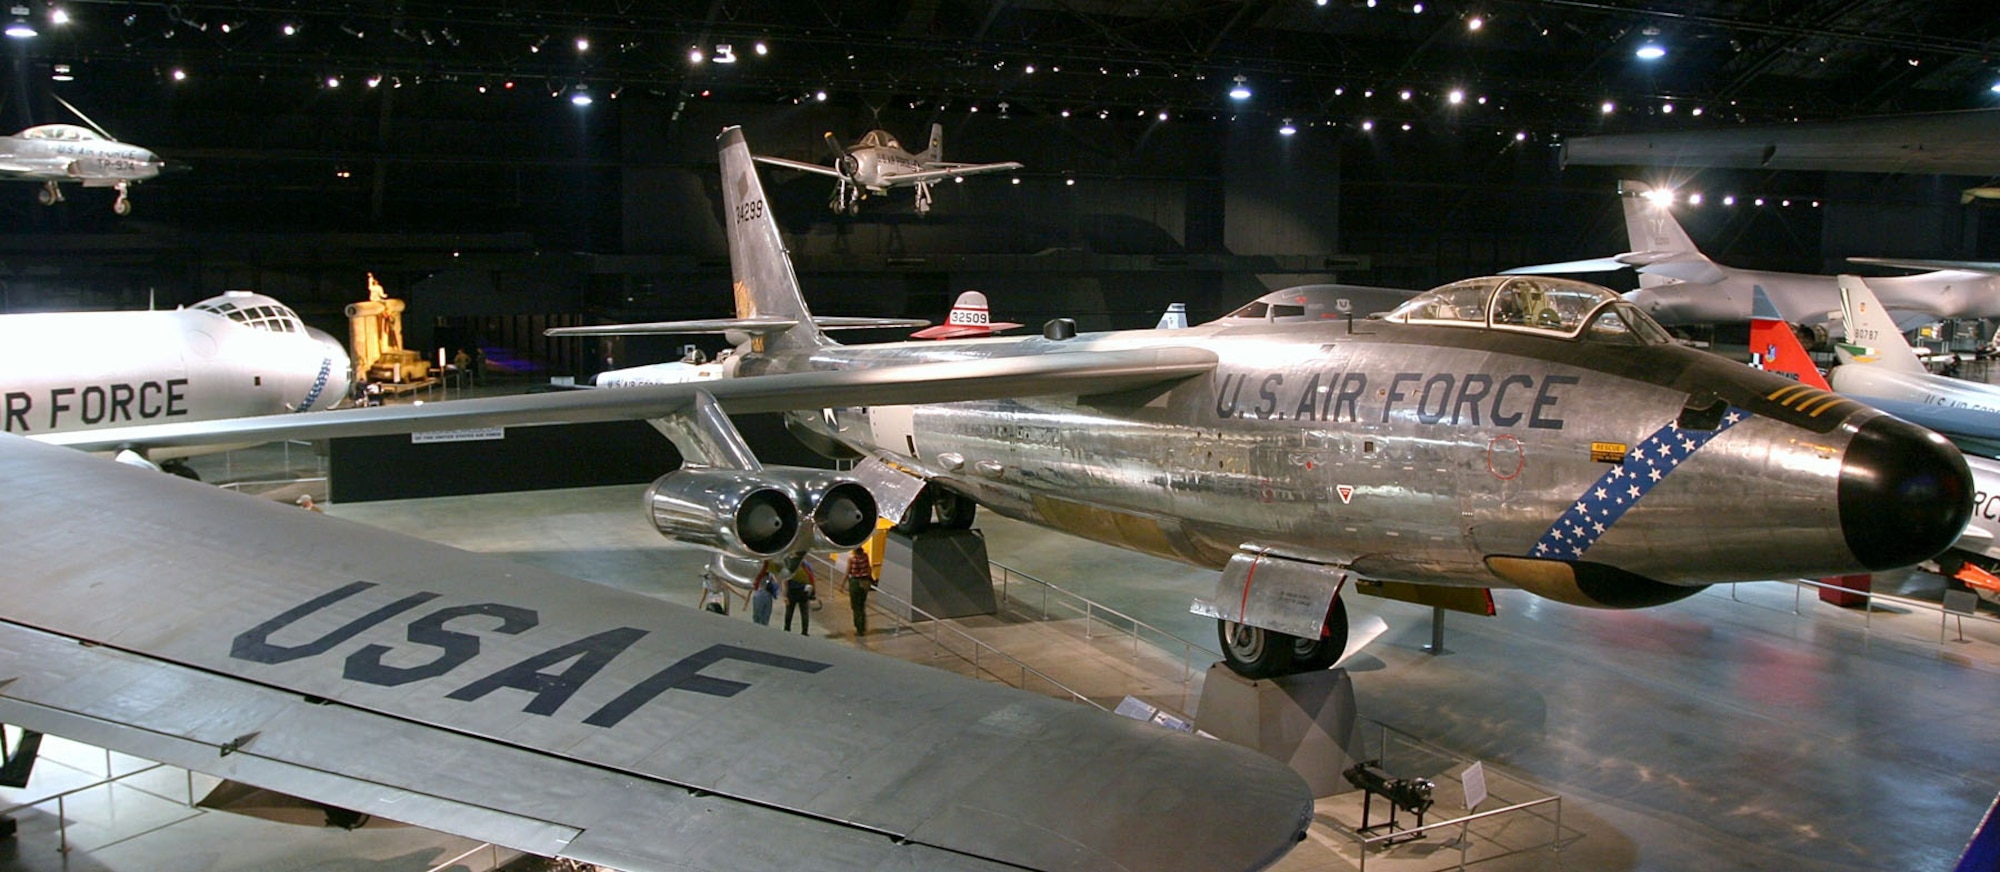 DAYTON, Ohio -- Boeing RB-47H in the Cold War Gallery at the National Museum of the United States Air Force. (Photo courtesy of Airshow Traveler)